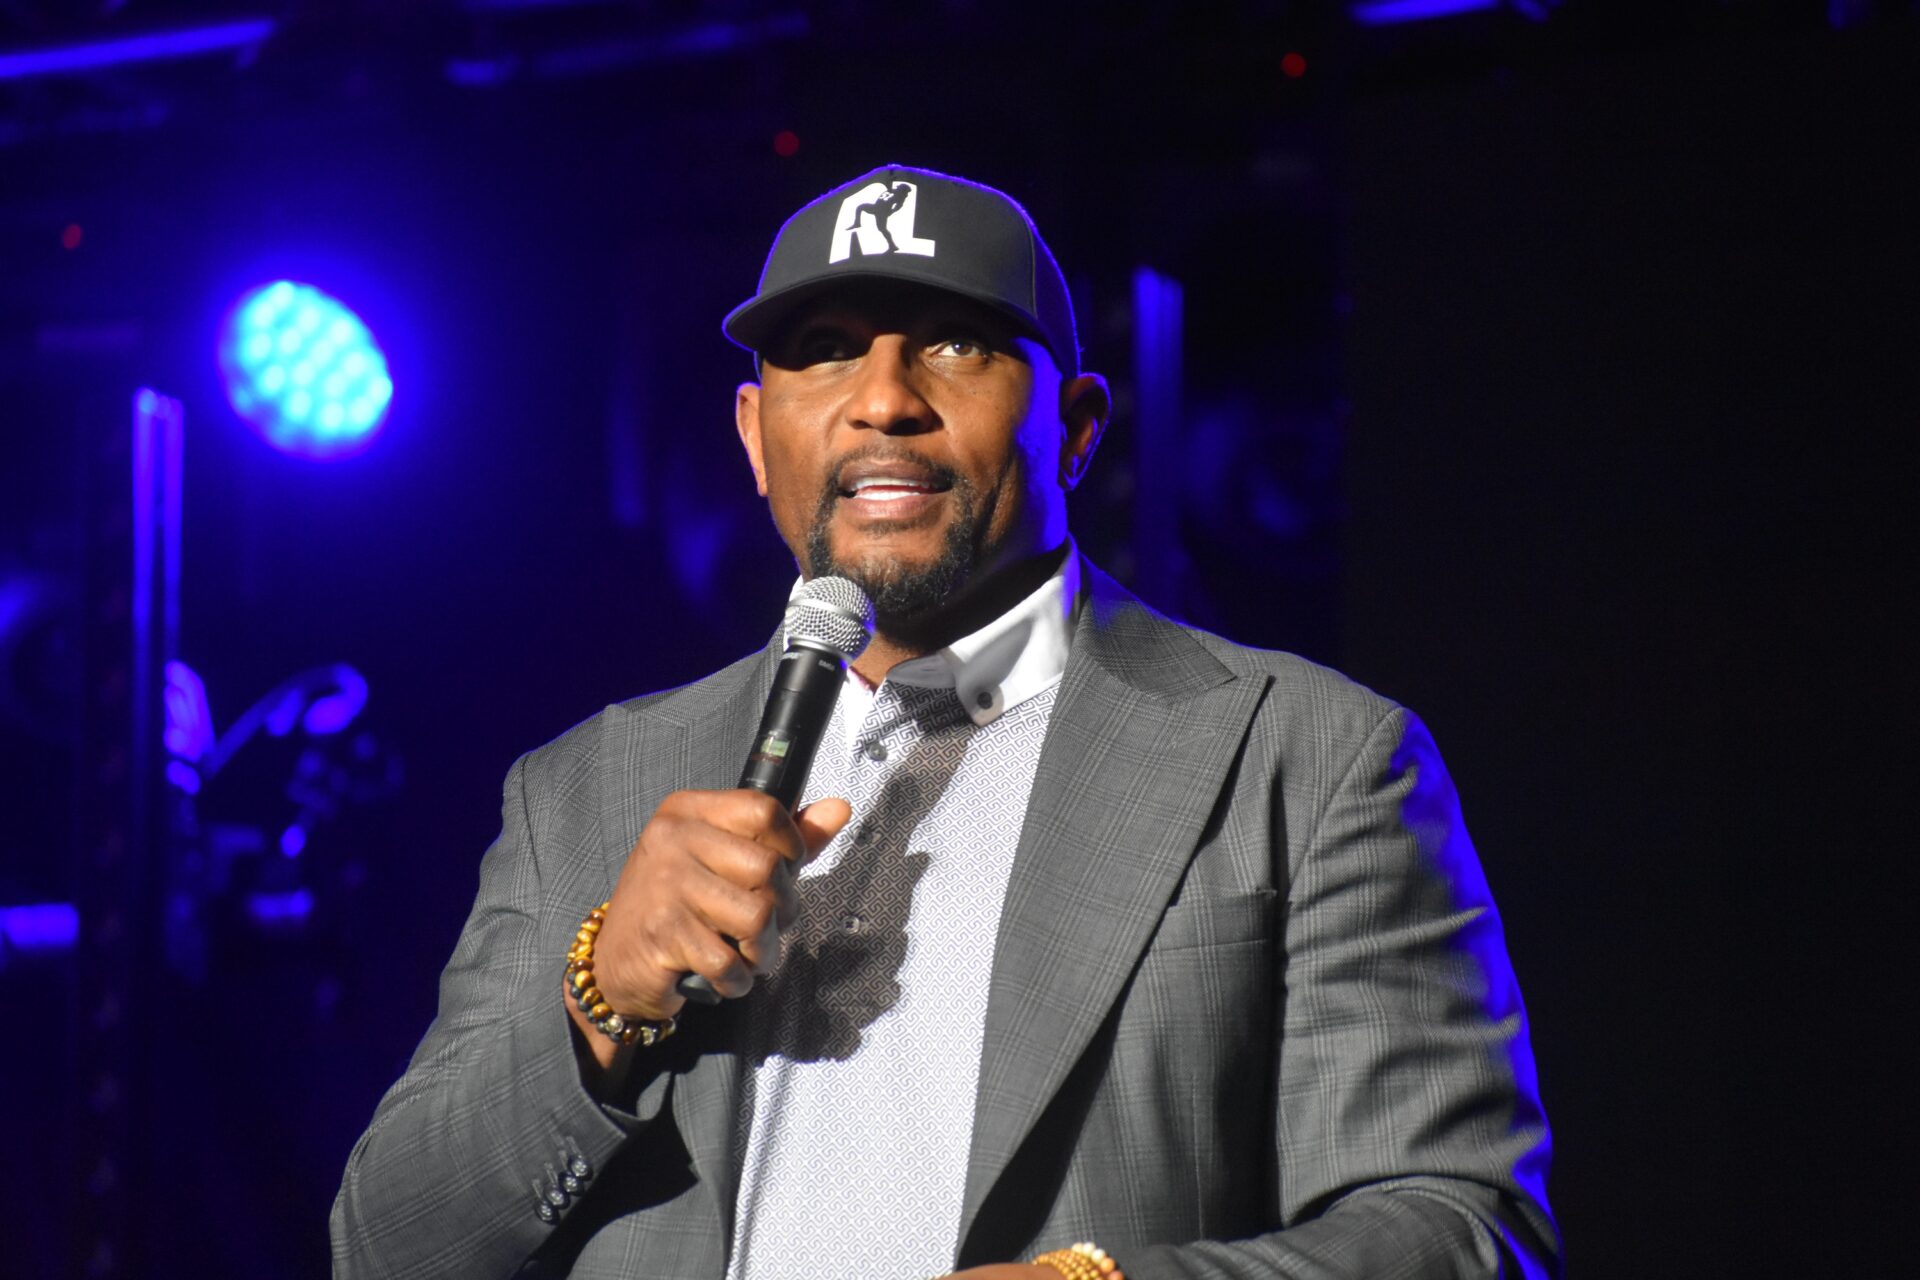 Baltimore Ravens NFL legend Ray Lewis speaks to the crowd at Dockside's second installment of 